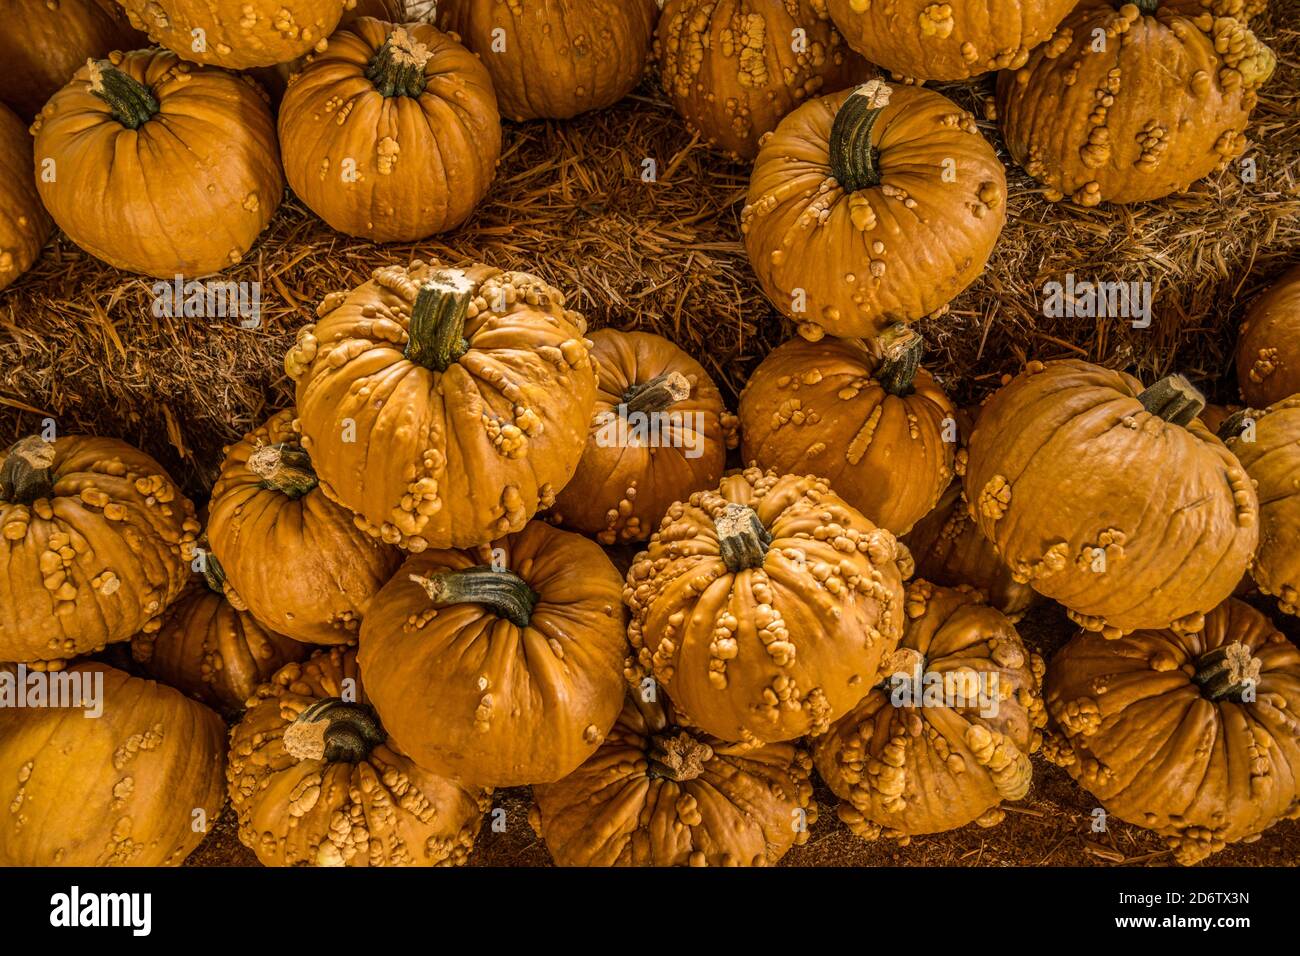 Looking downward closeup on small goose bump pumpkins sitting on hay bales outdoors in autumn Stock Photo